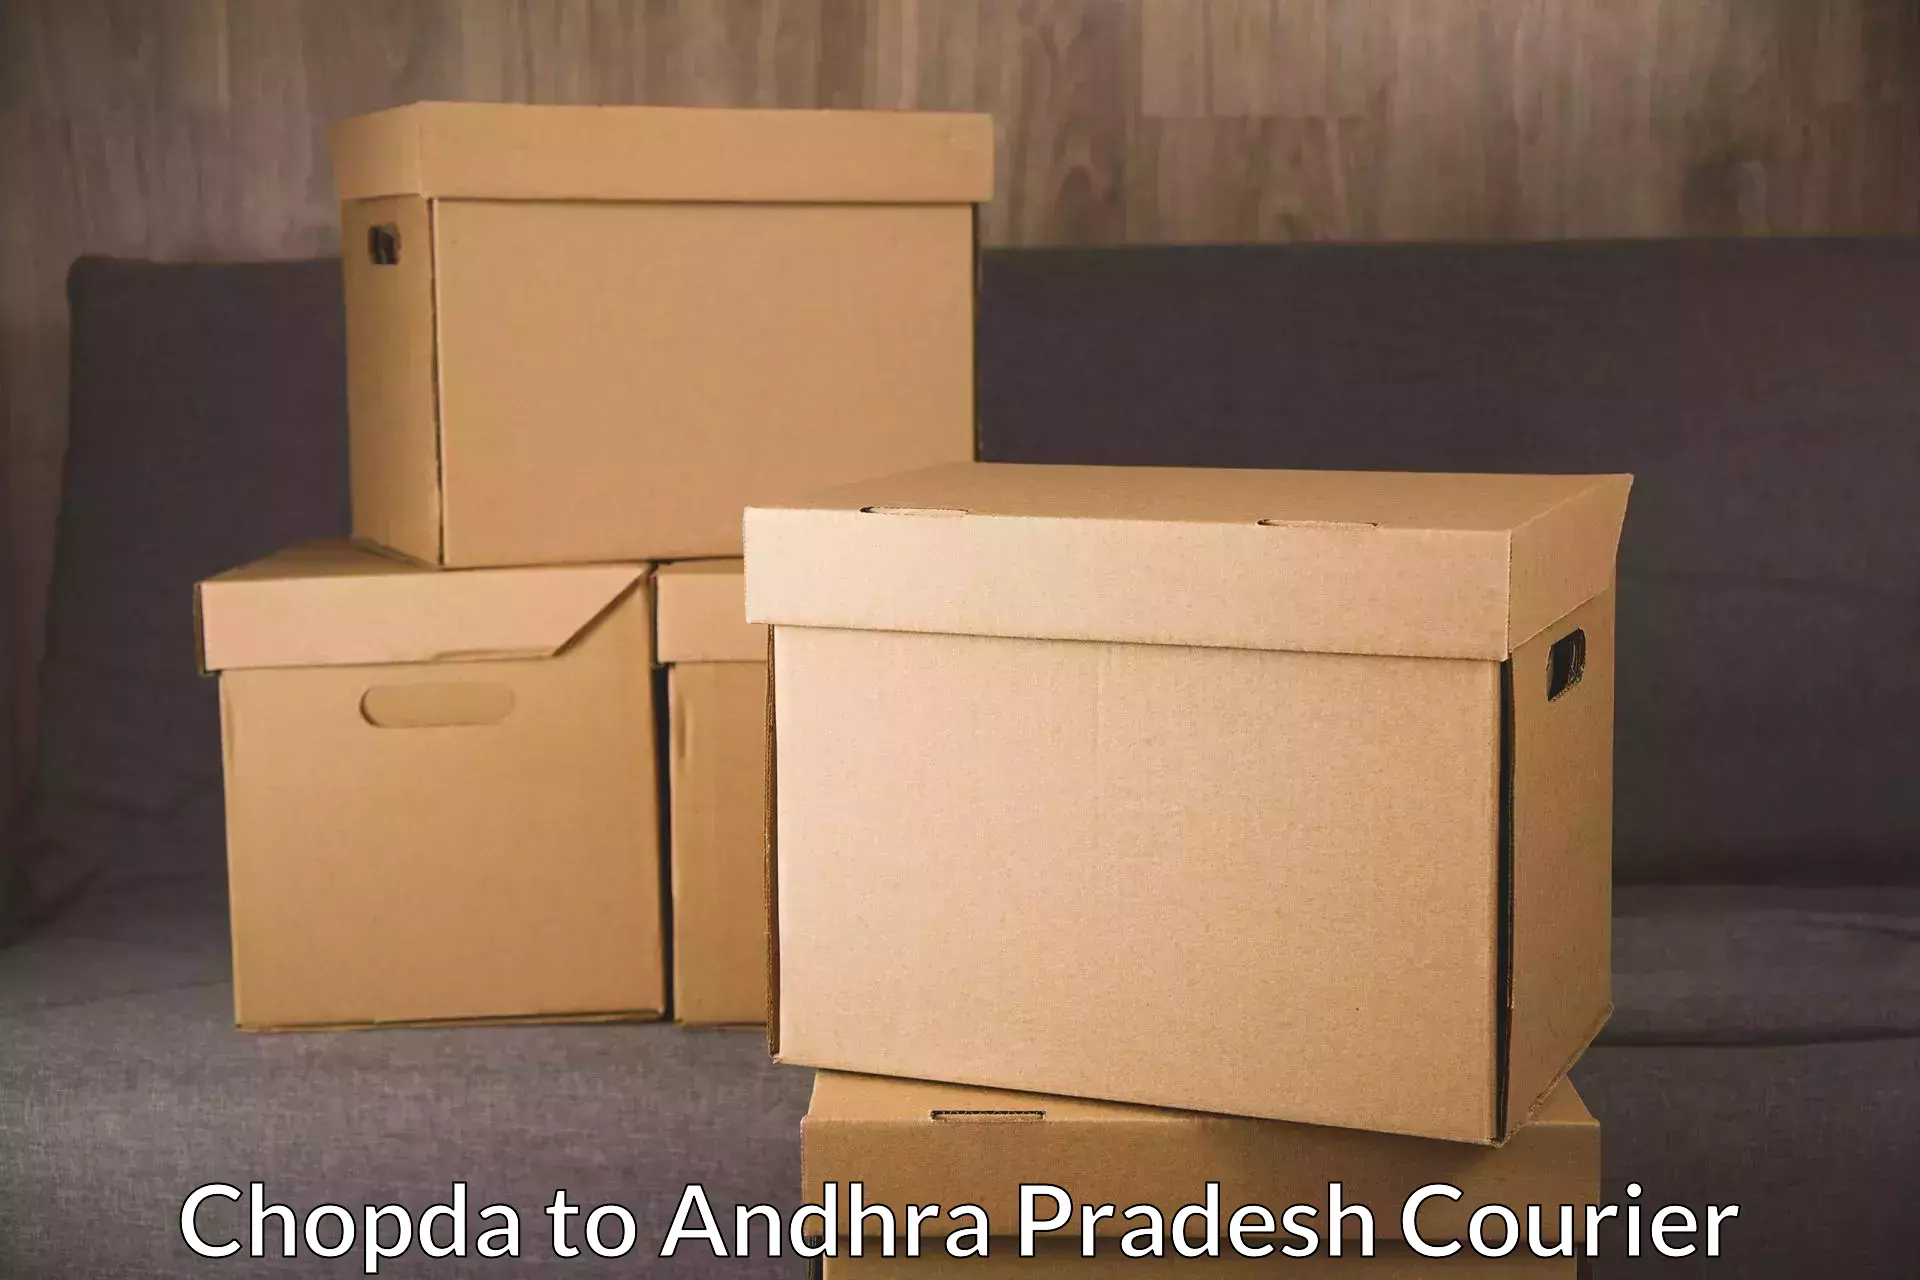 Sustainable shipping practices Chopda to Visakhapatnam Port